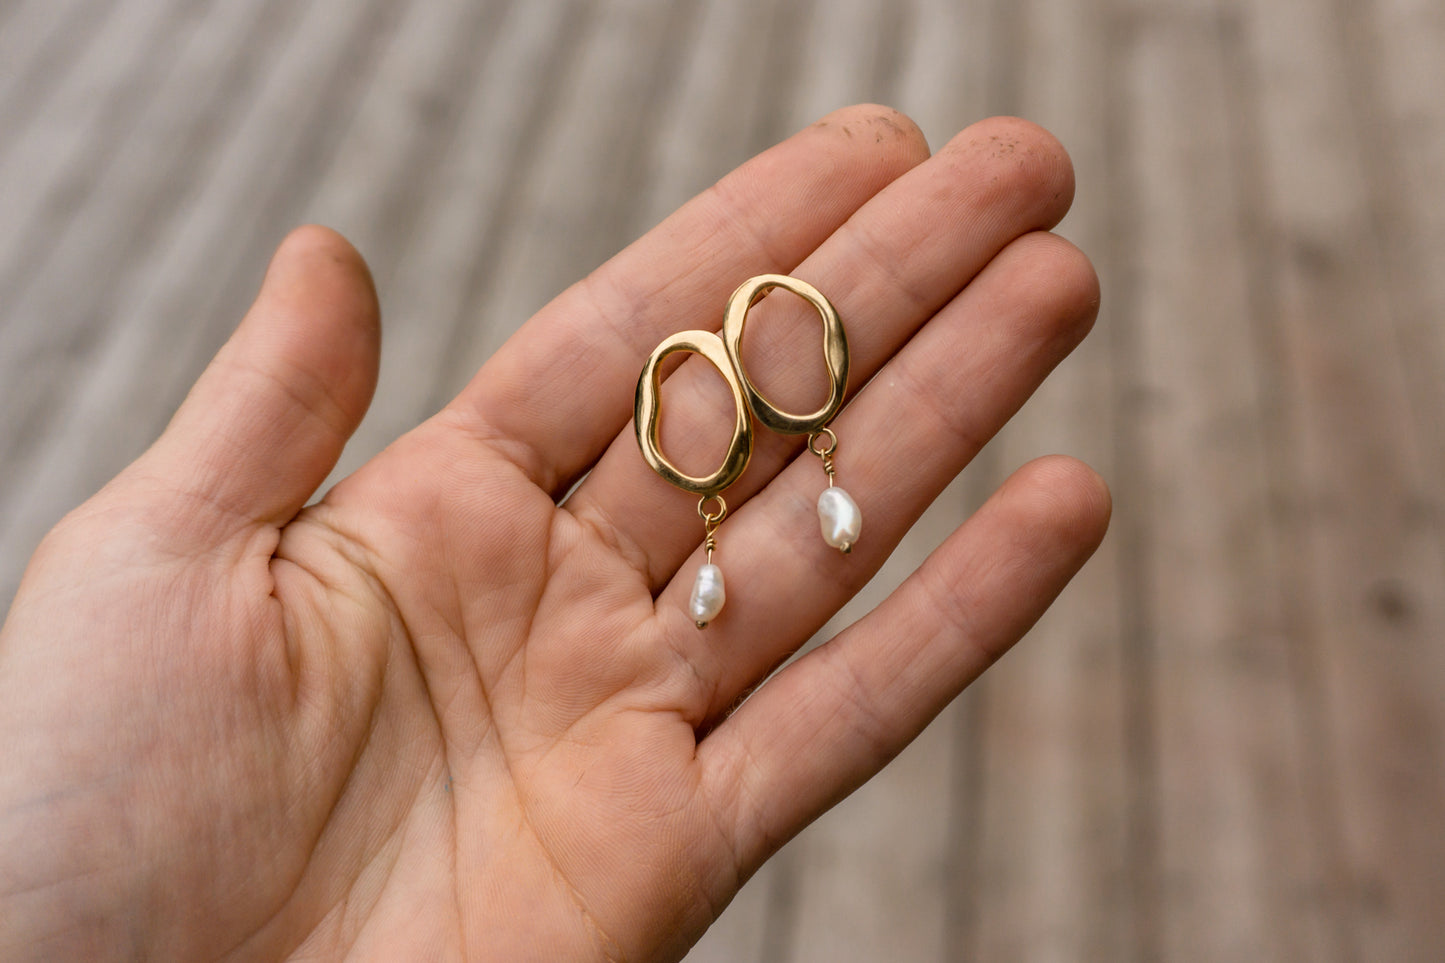 Pearl earrings - gold plated, motion